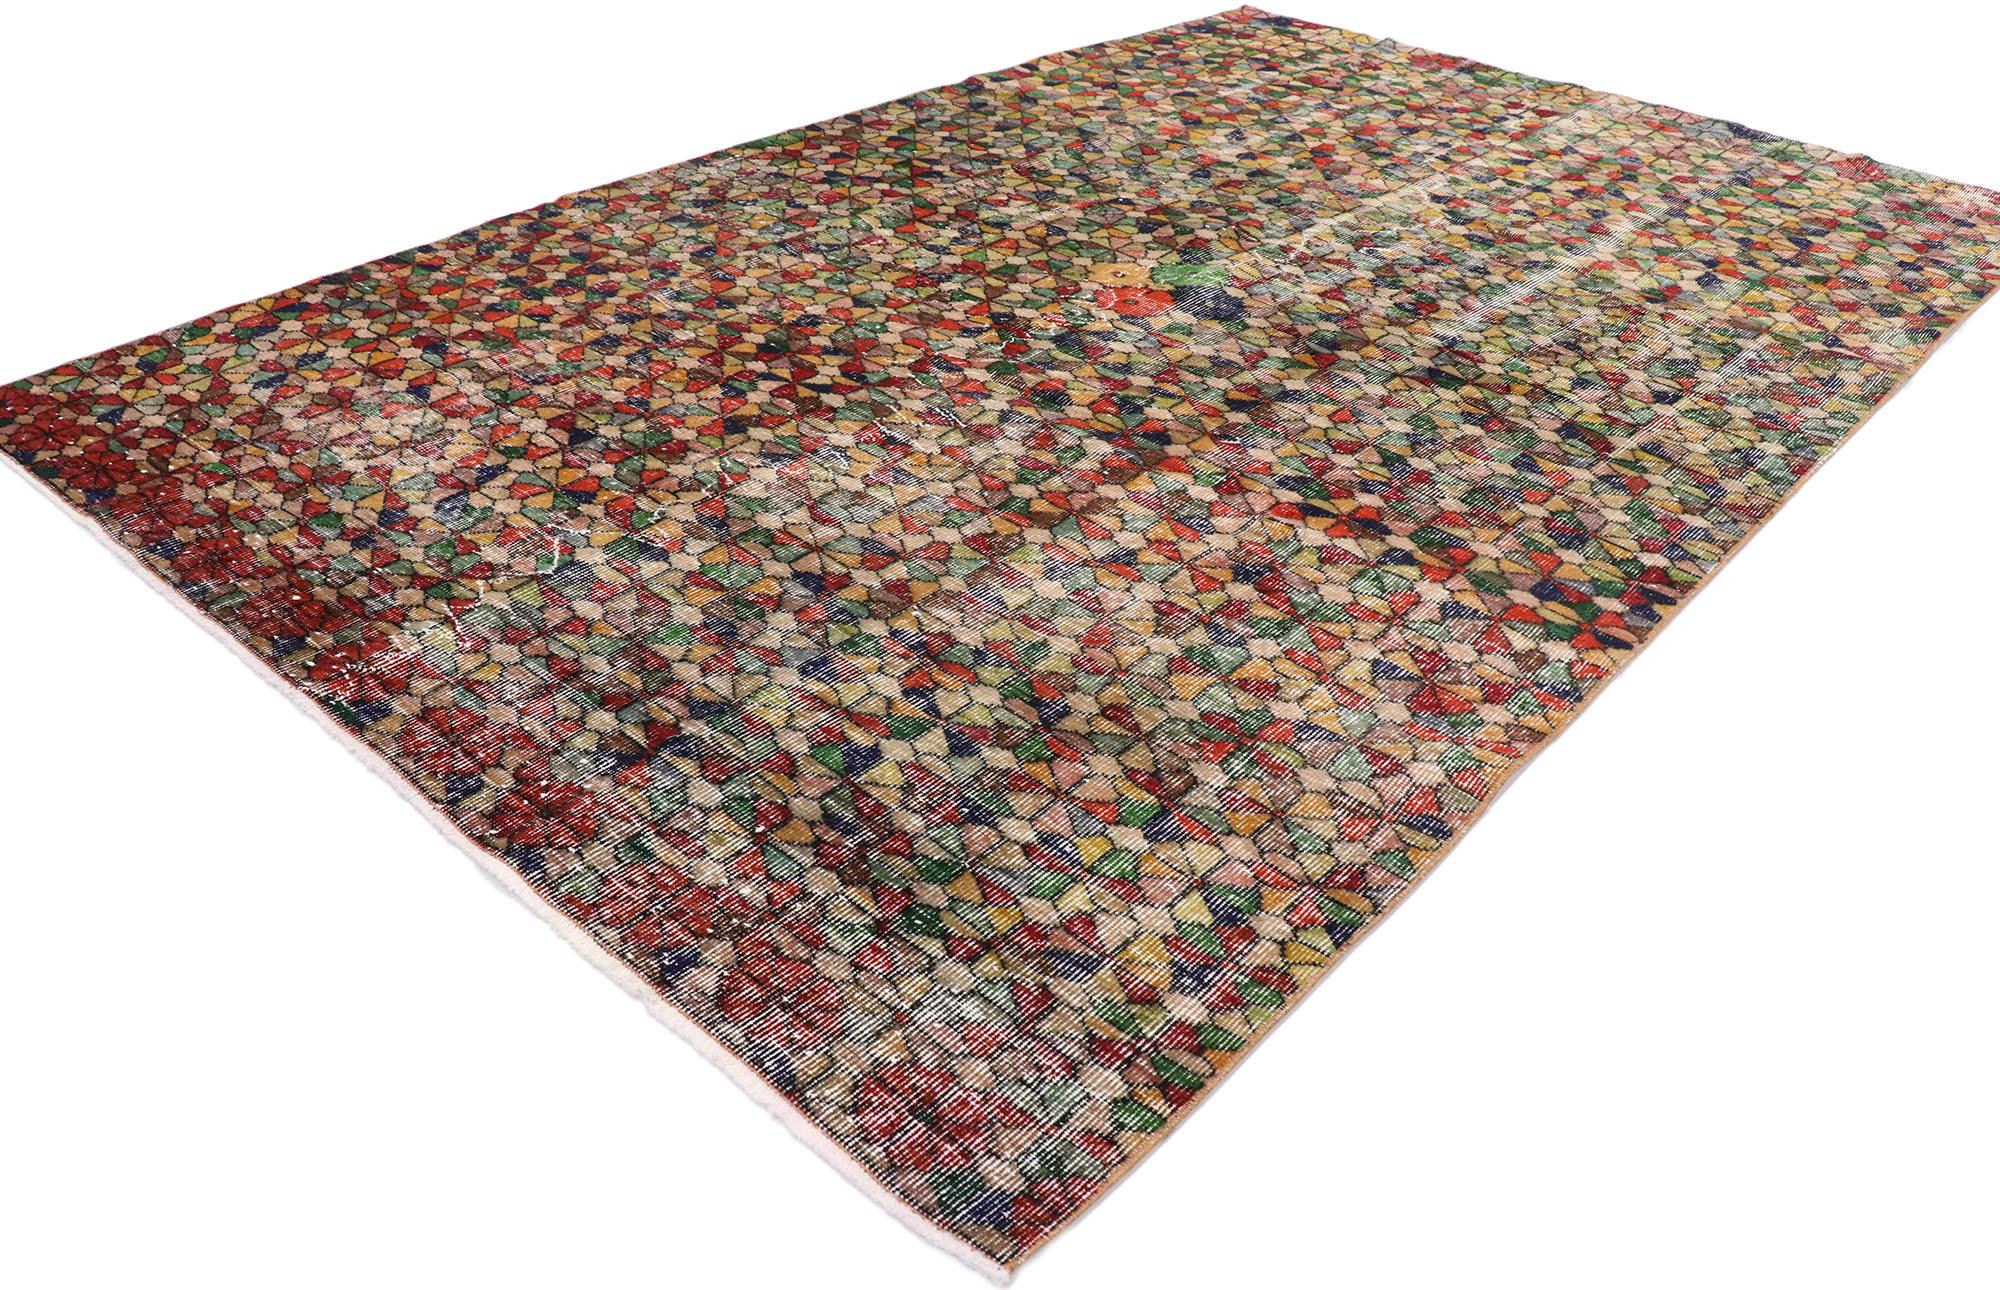 53331, Distressed Vintage Turkish Sivas Rug with Postmodern Romantic Style. This hand knotted wool distressed vintage Turkish Sivas rug features a polychromatic all-over floral pattern. A bouquet of four large blossoms in the center of the